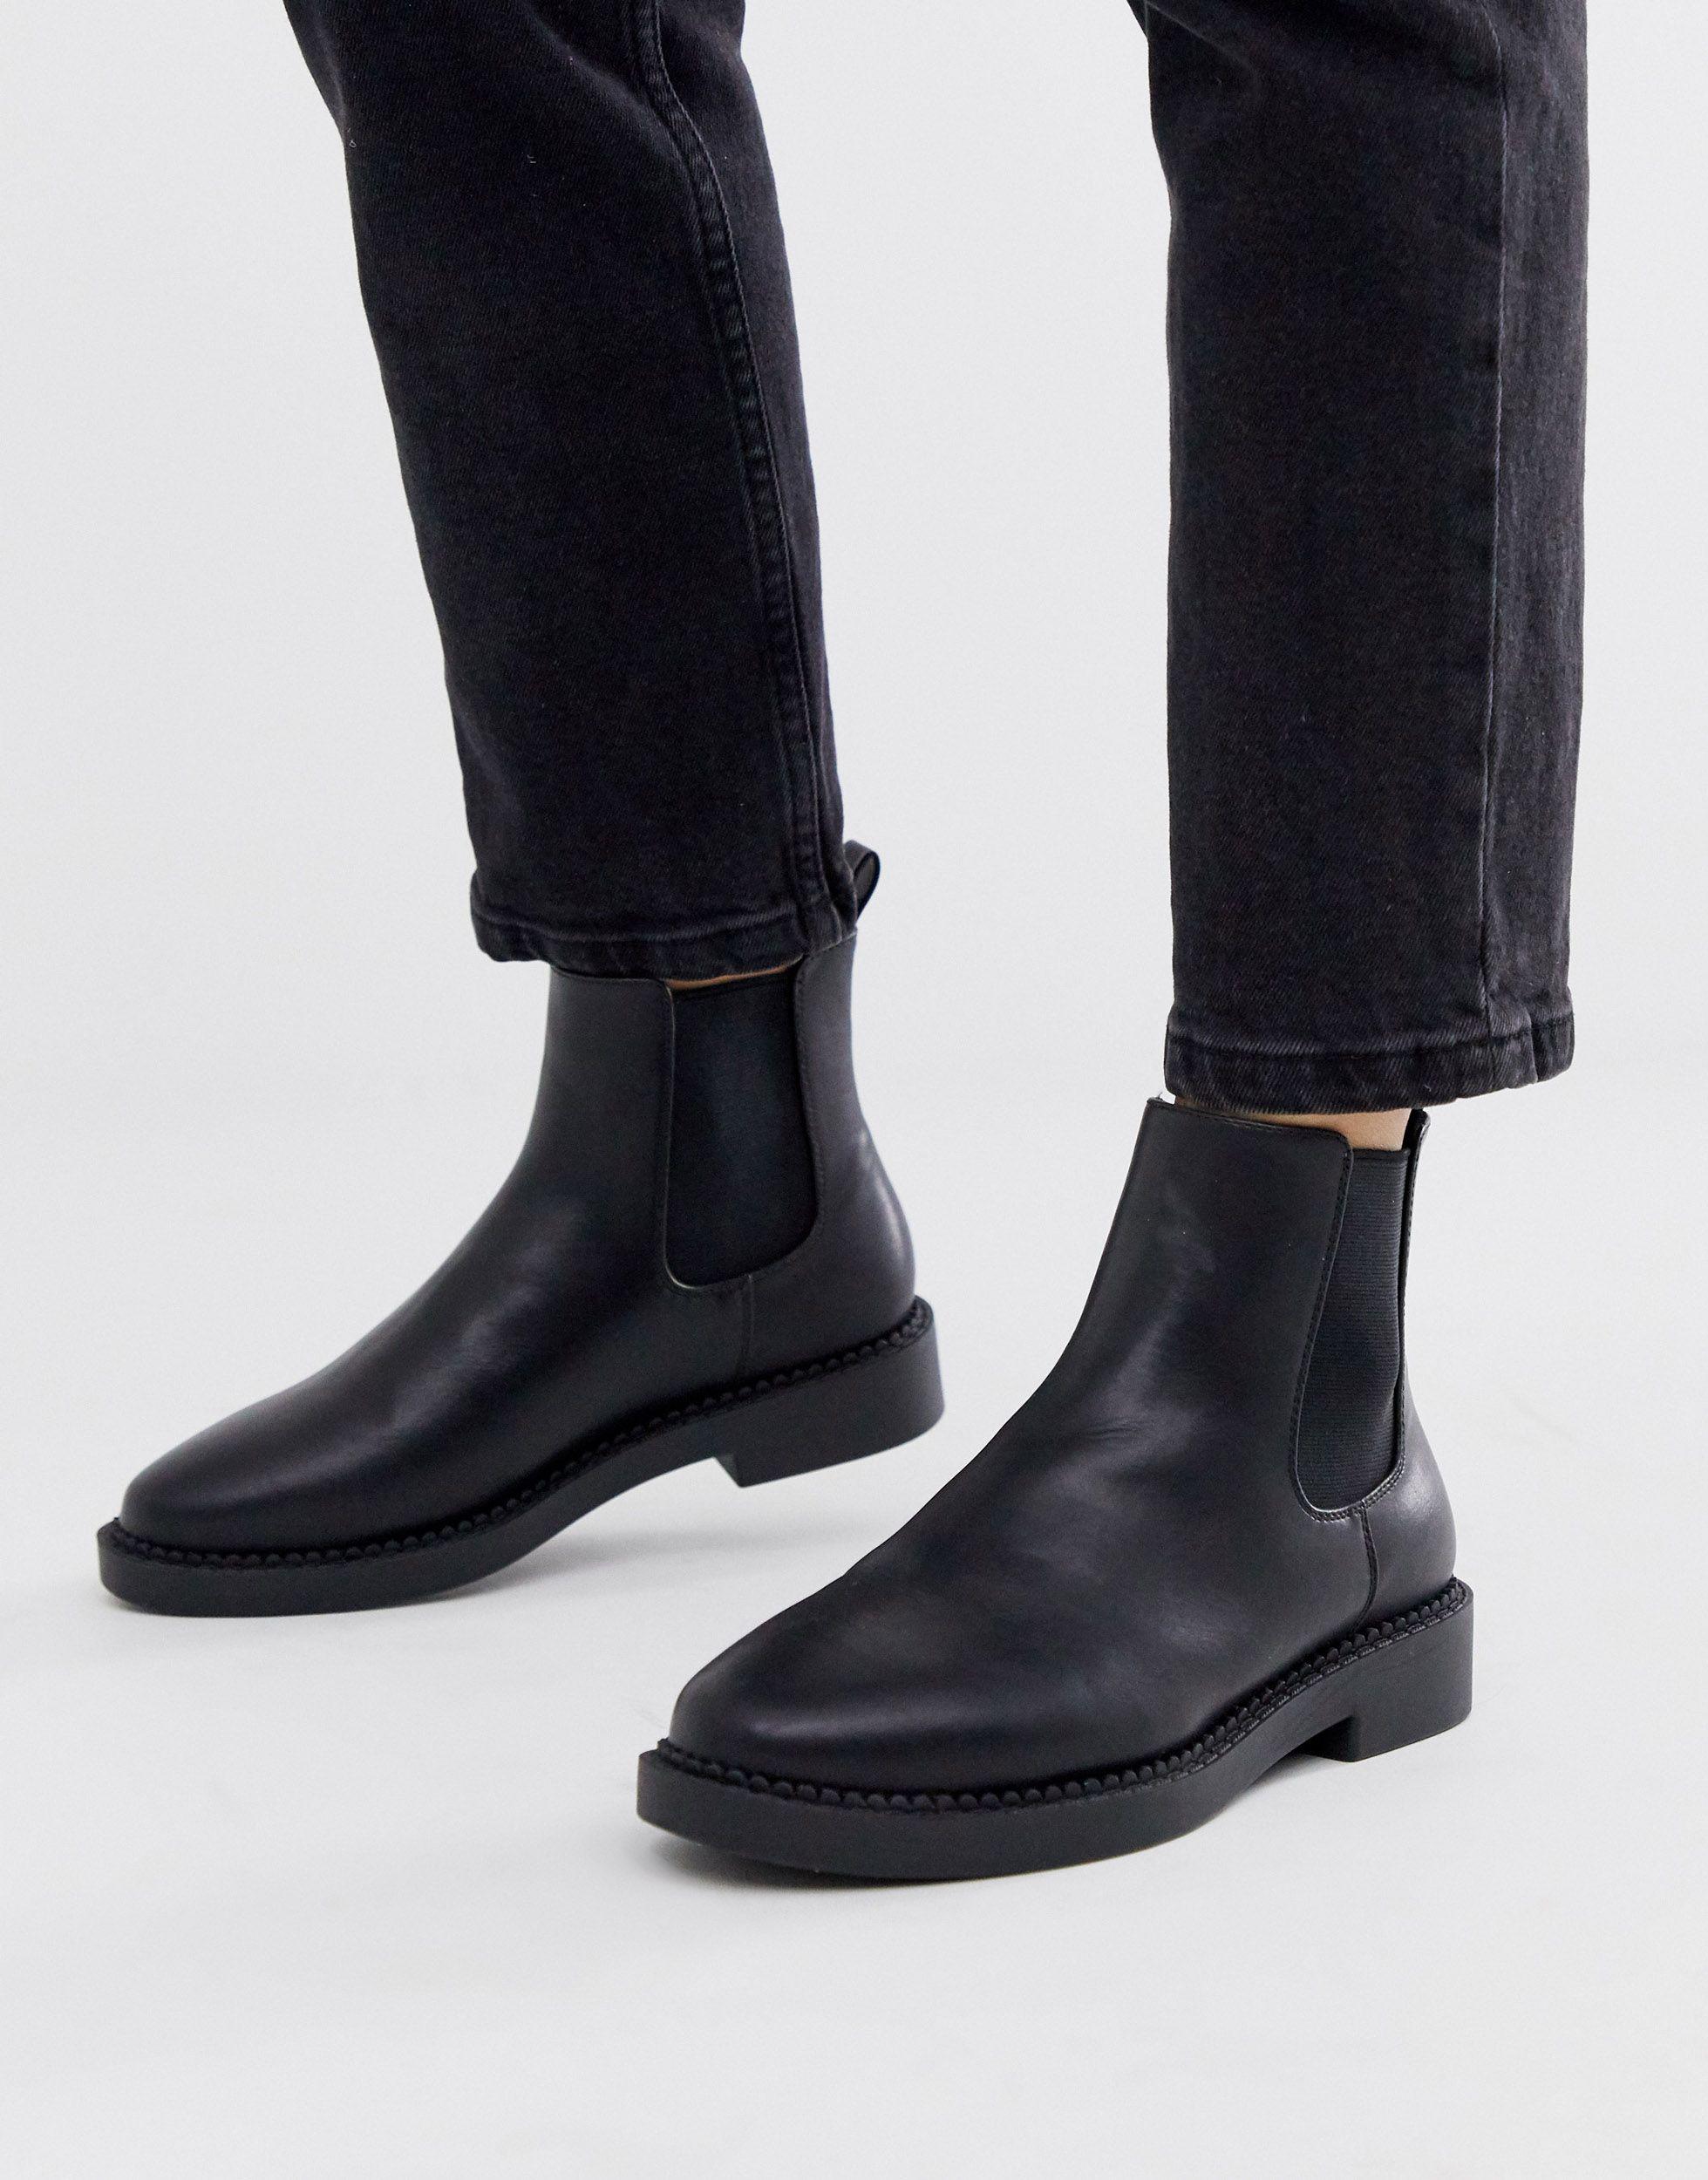 ASOS Leather Auto Chunky Chelsea Boots in Black - Lyst